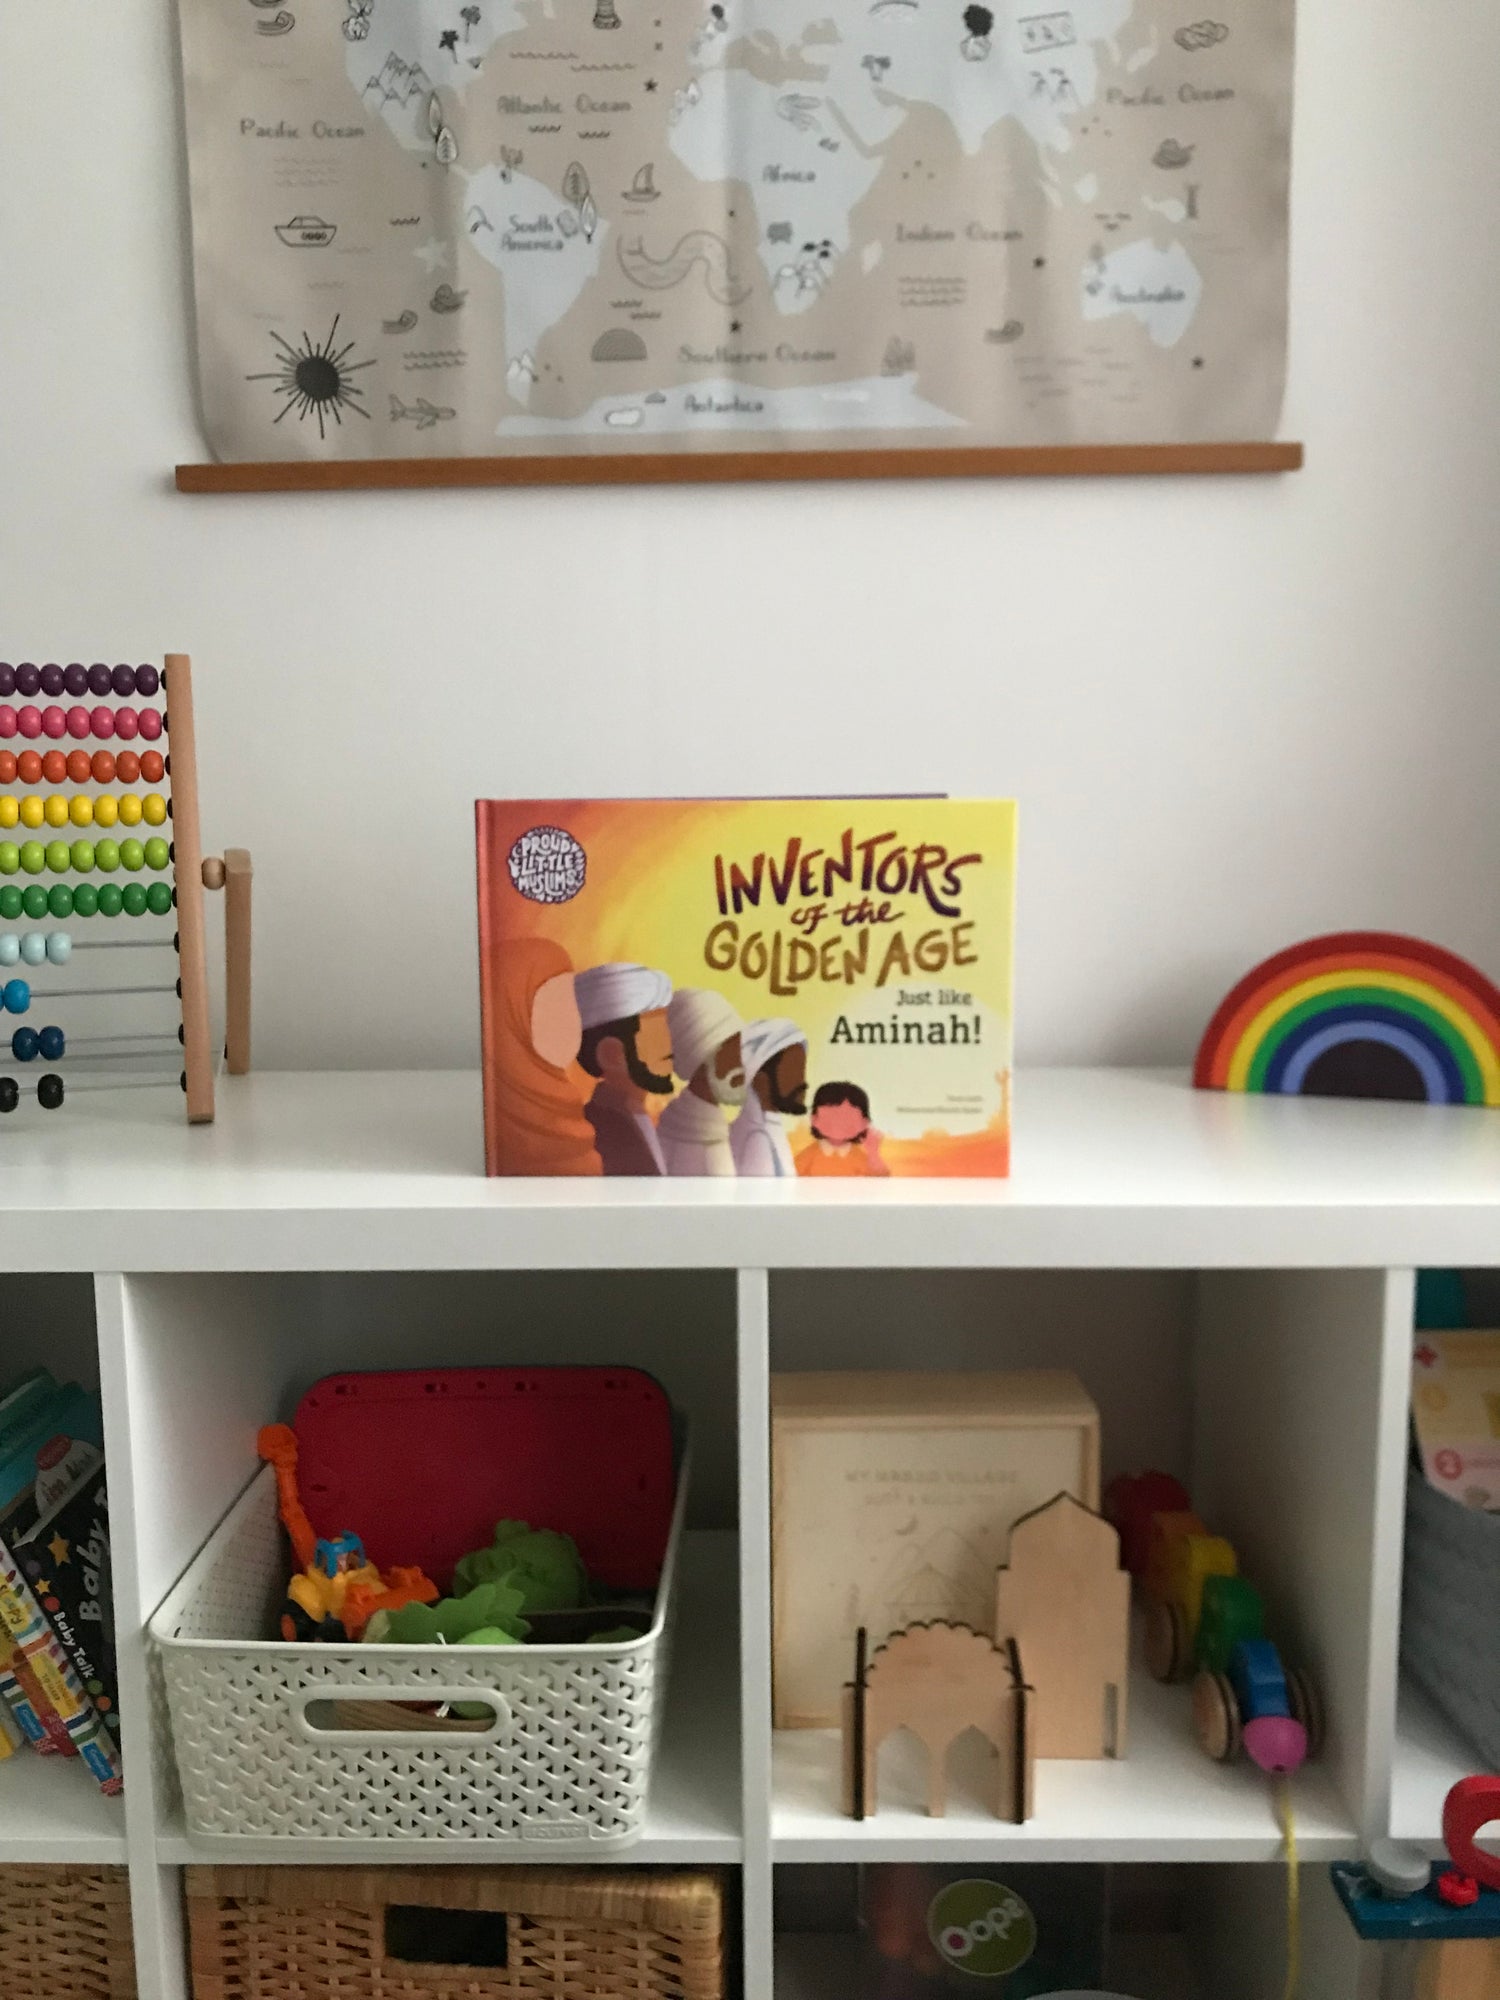 A Personalised Muslim Children's book by Proud Little Muslims on a bookshelf of colourful toys. The story is about the Islamic Golden Age called Inventors of the Golden Age: Just like you!